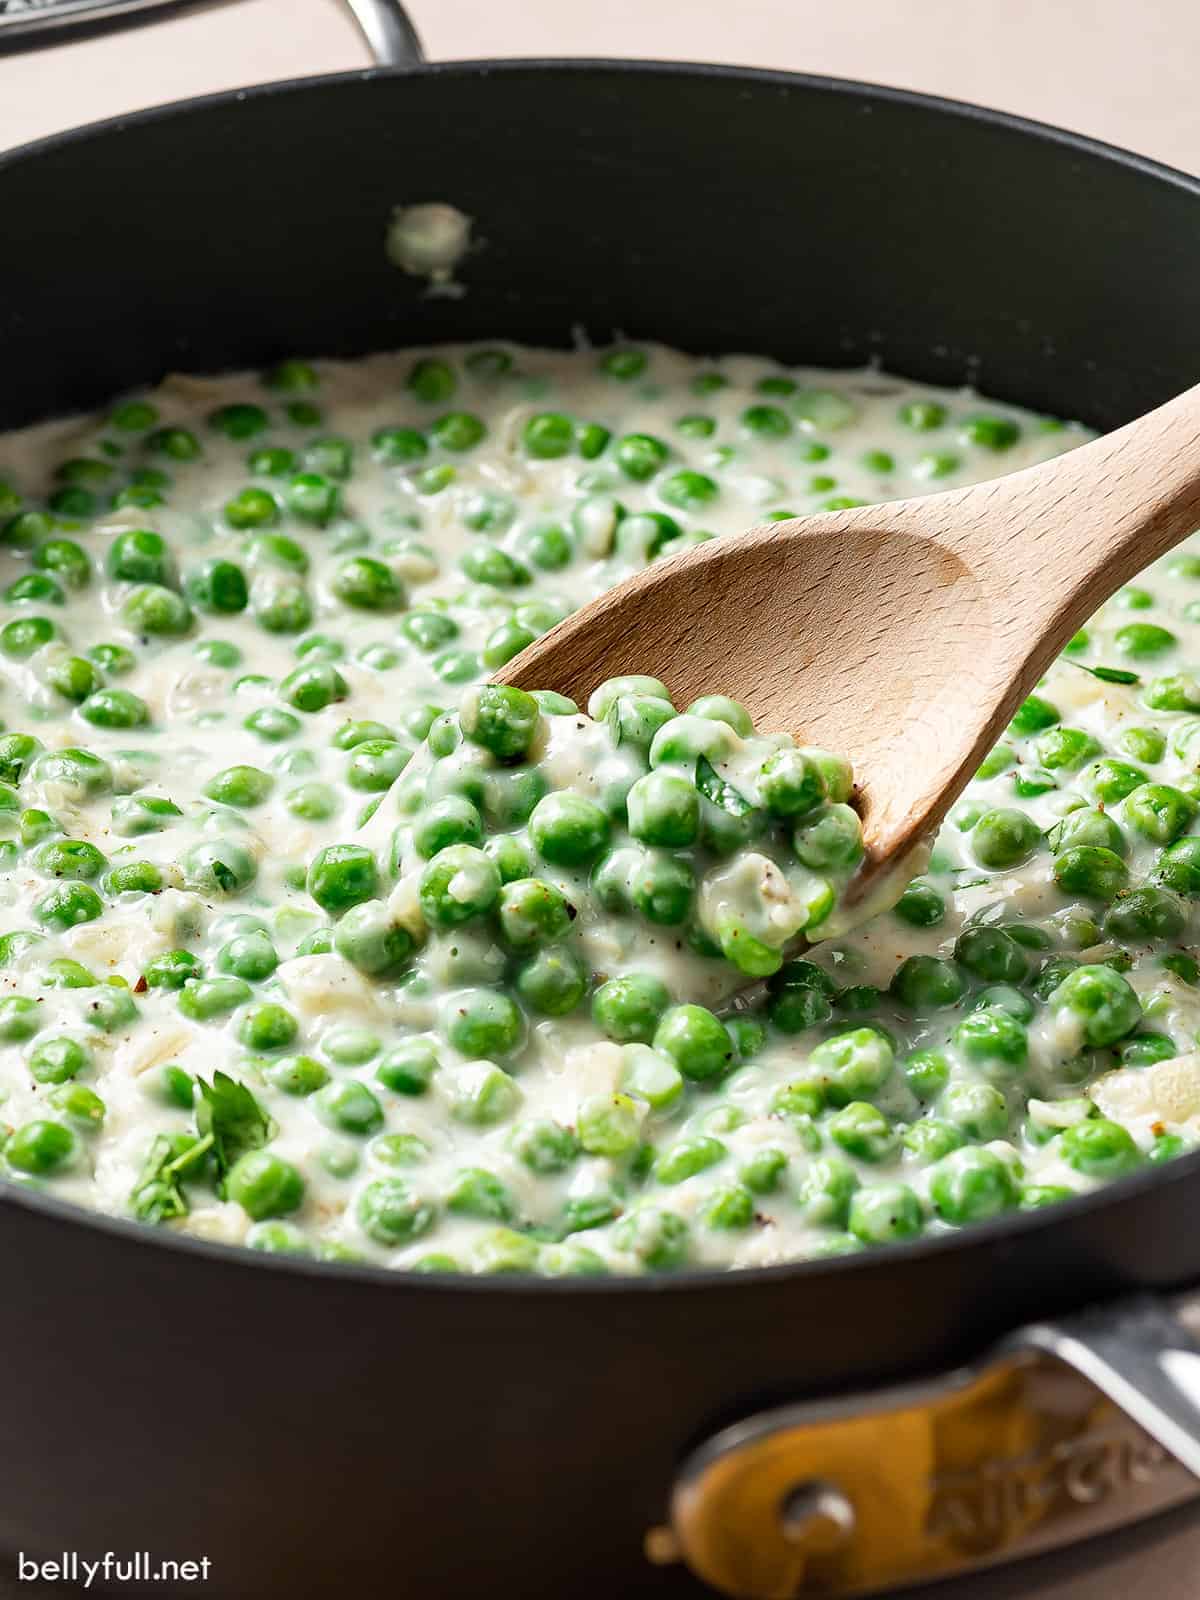 Homemade creamed peas in a pan. A wooden spoon is stirring the peas 